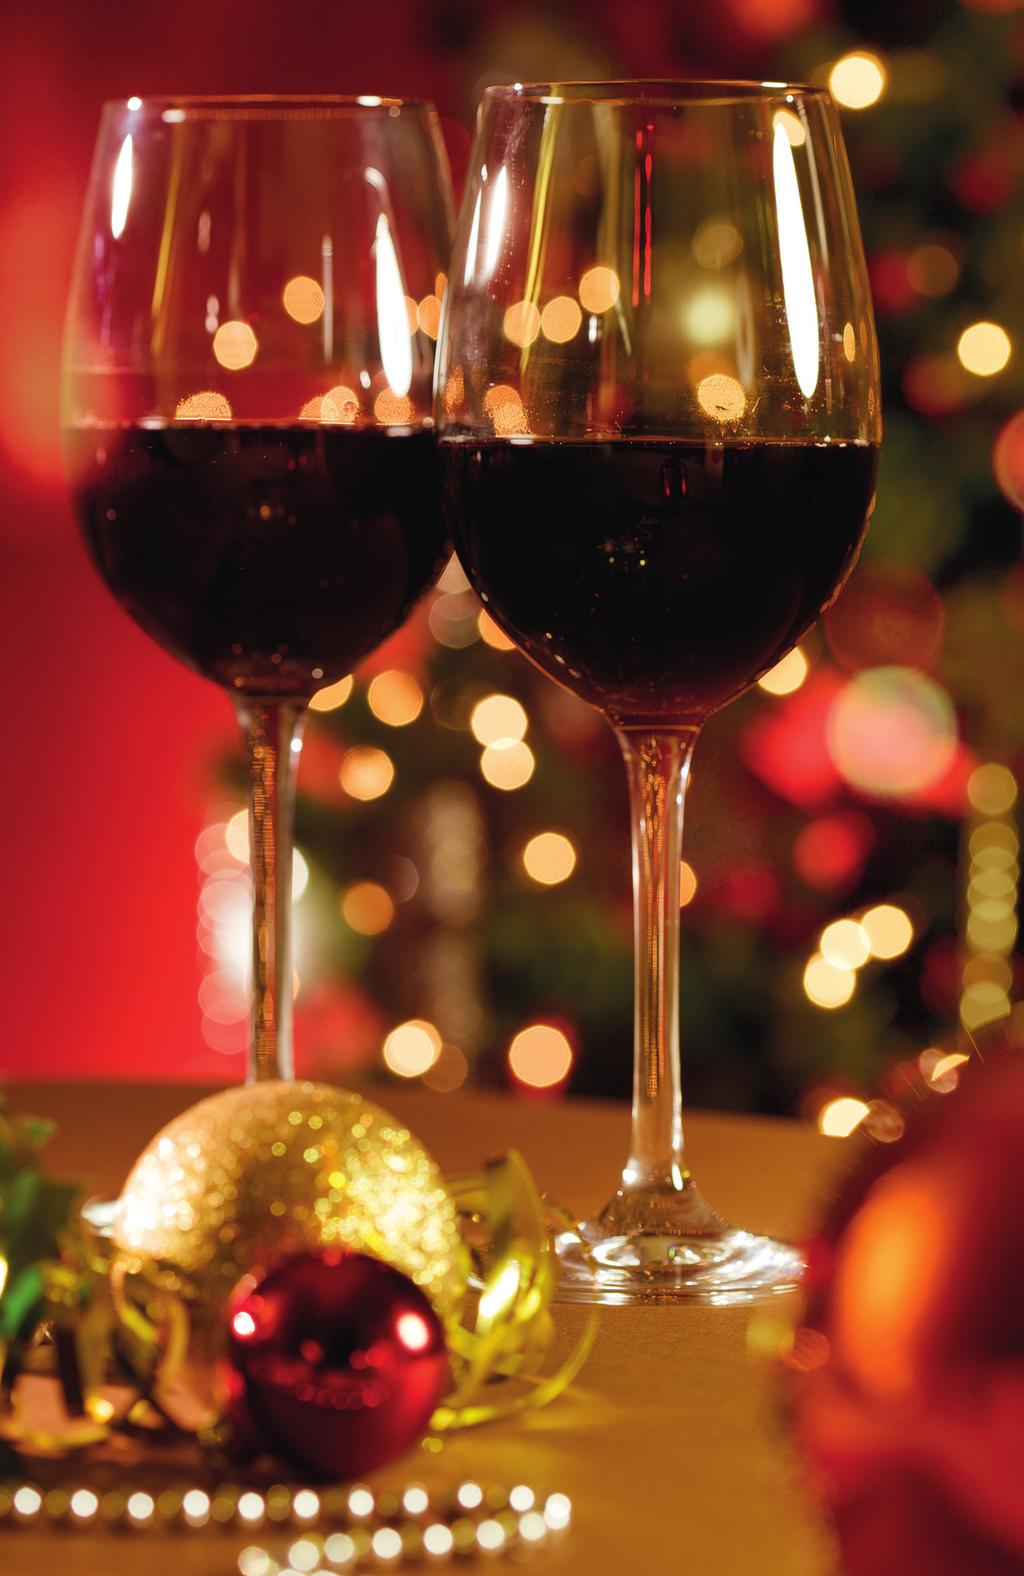 DRINK OFFERS Pre-order drinks for your Christmas Party and enjoy a great saving 20% off Wine Bucket 2 house red wine and 2 house white wine 50.